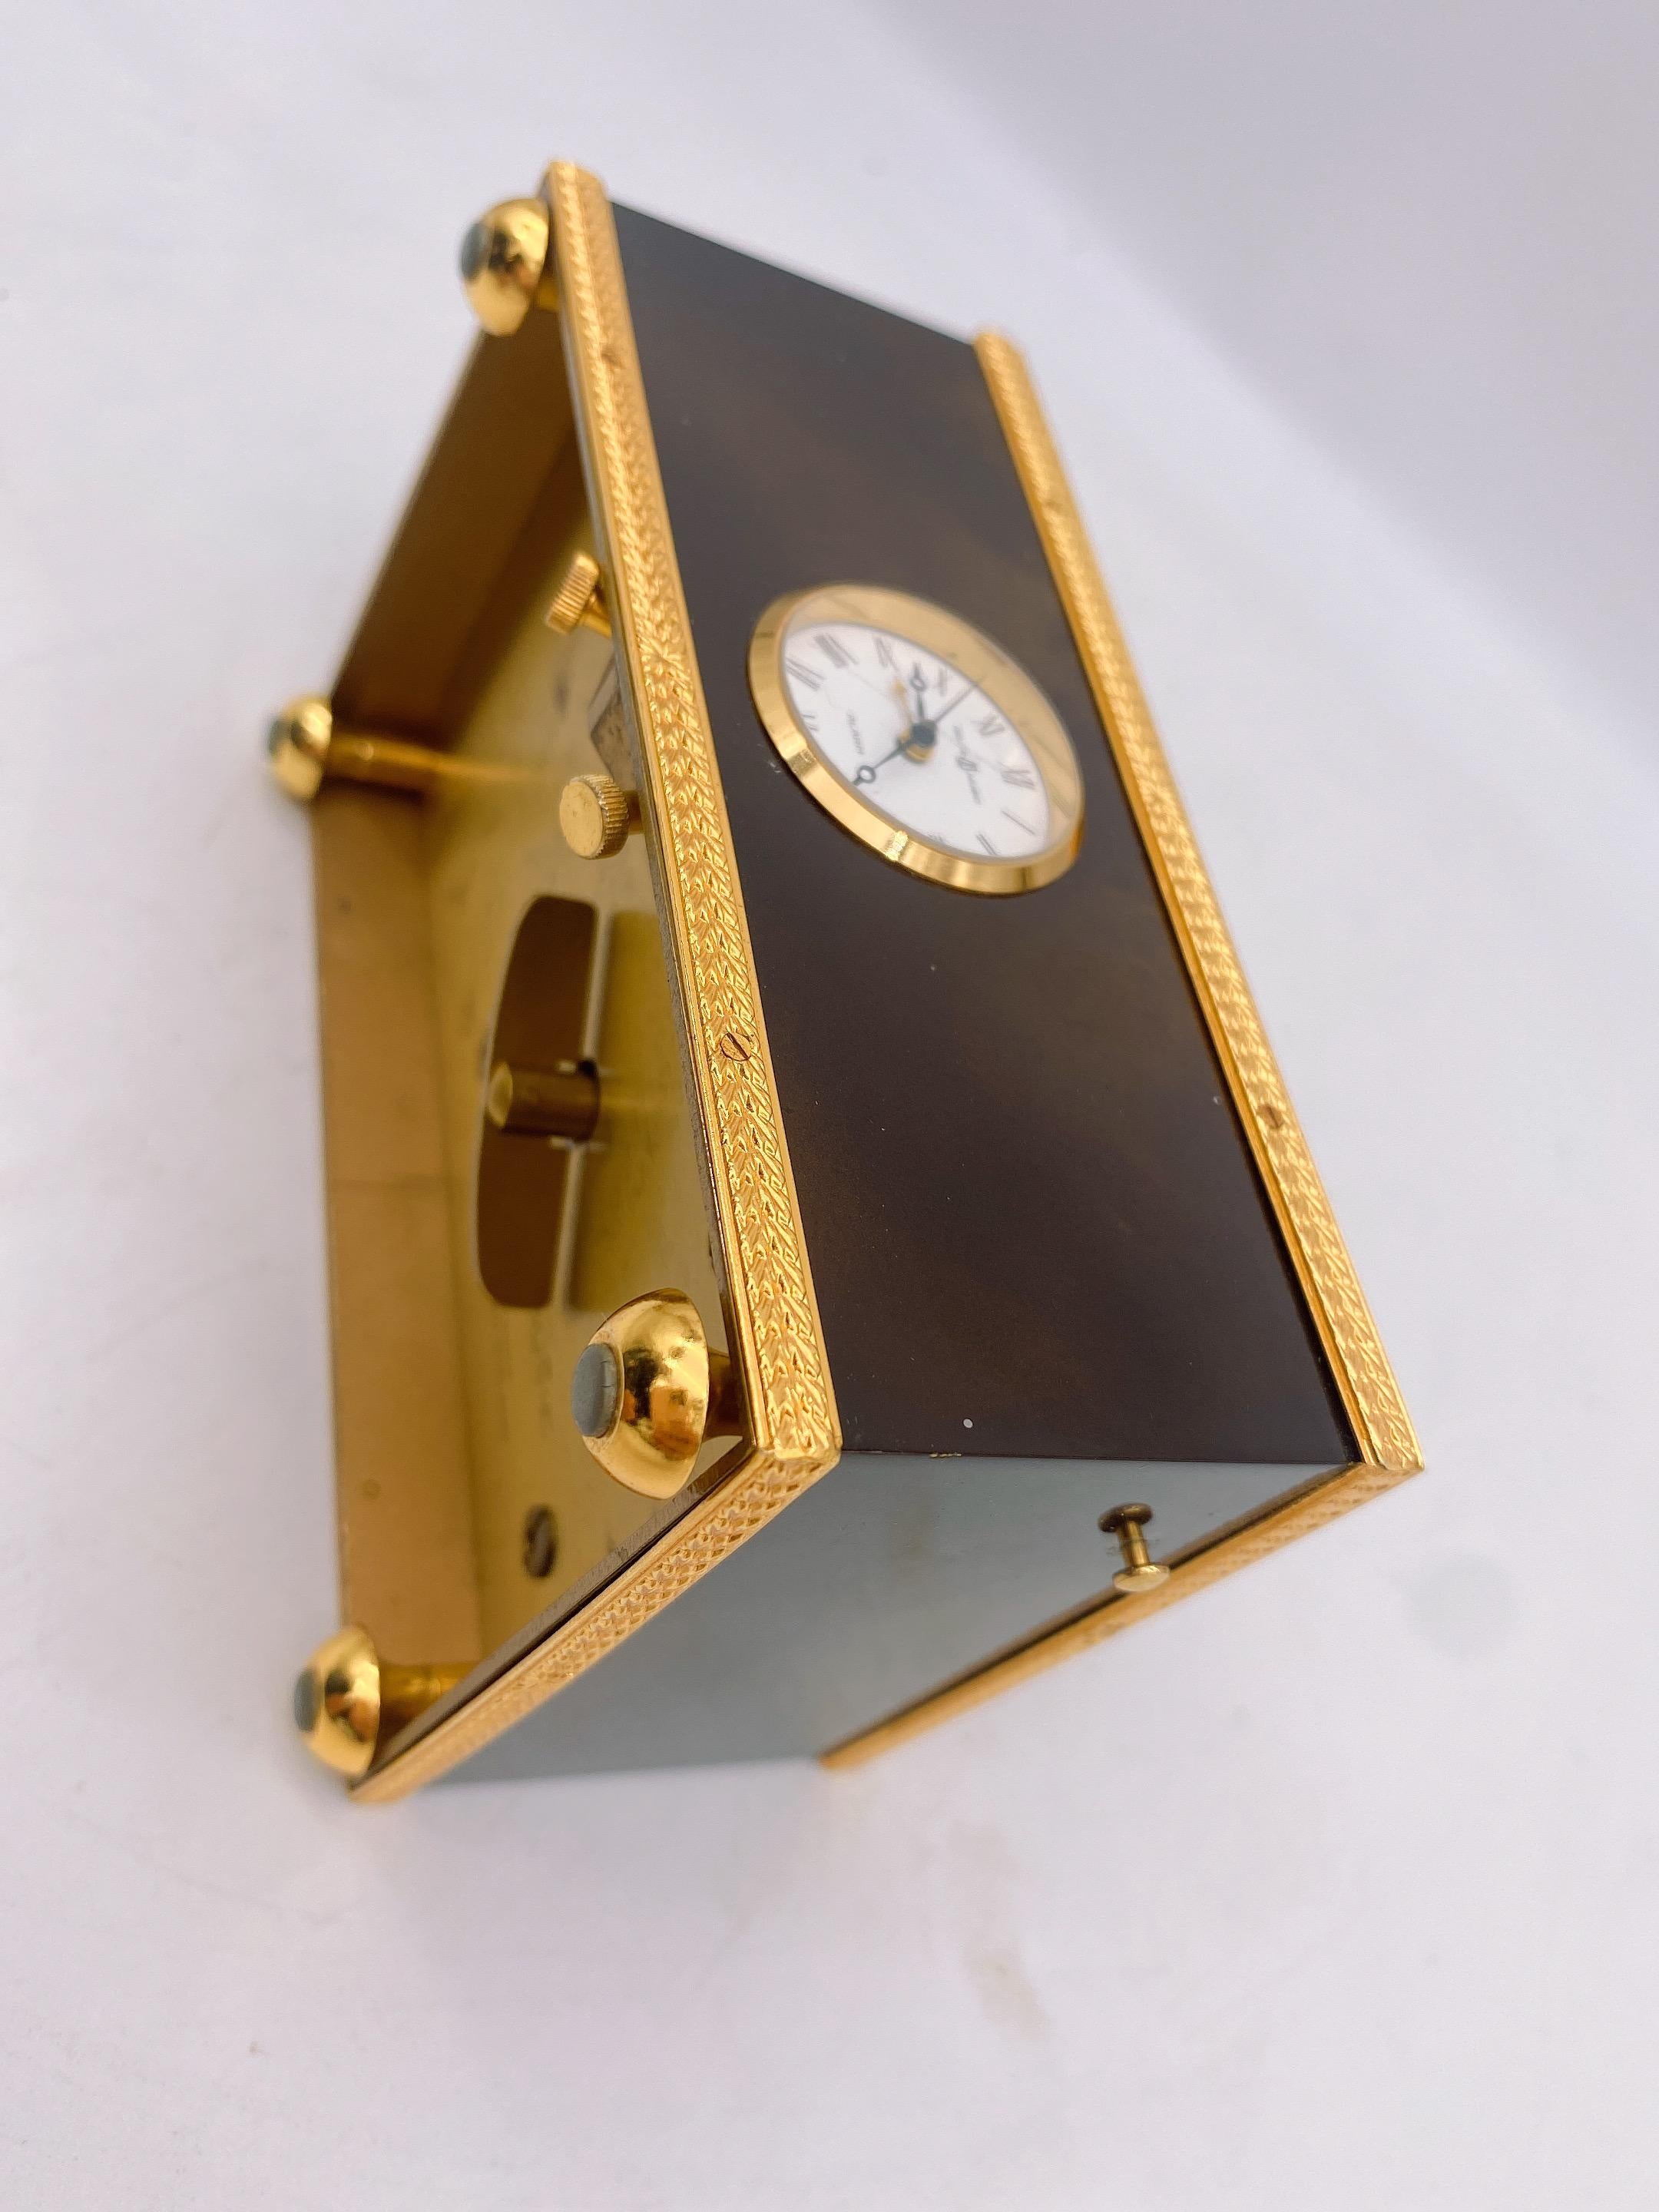 Hand-Carved Reuge Enameled Music Box with Bird Automaton and Clock